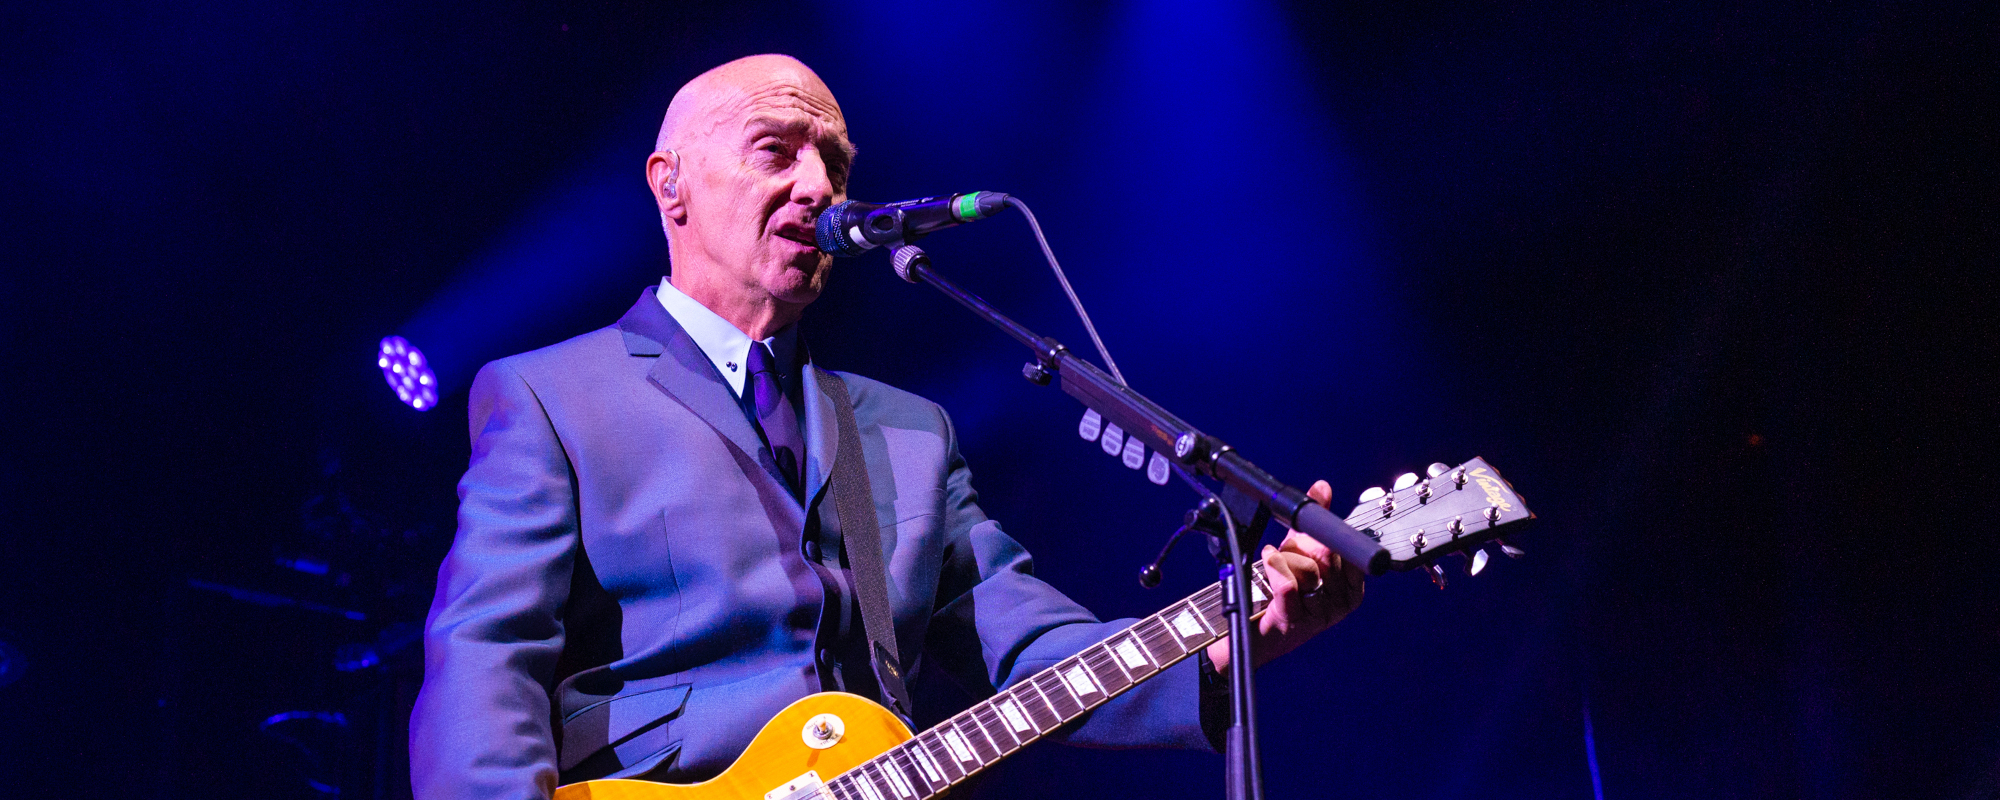 MusicBird Acquires Midge Ure’s Catalog, Including His Work with Ultravox, Visage